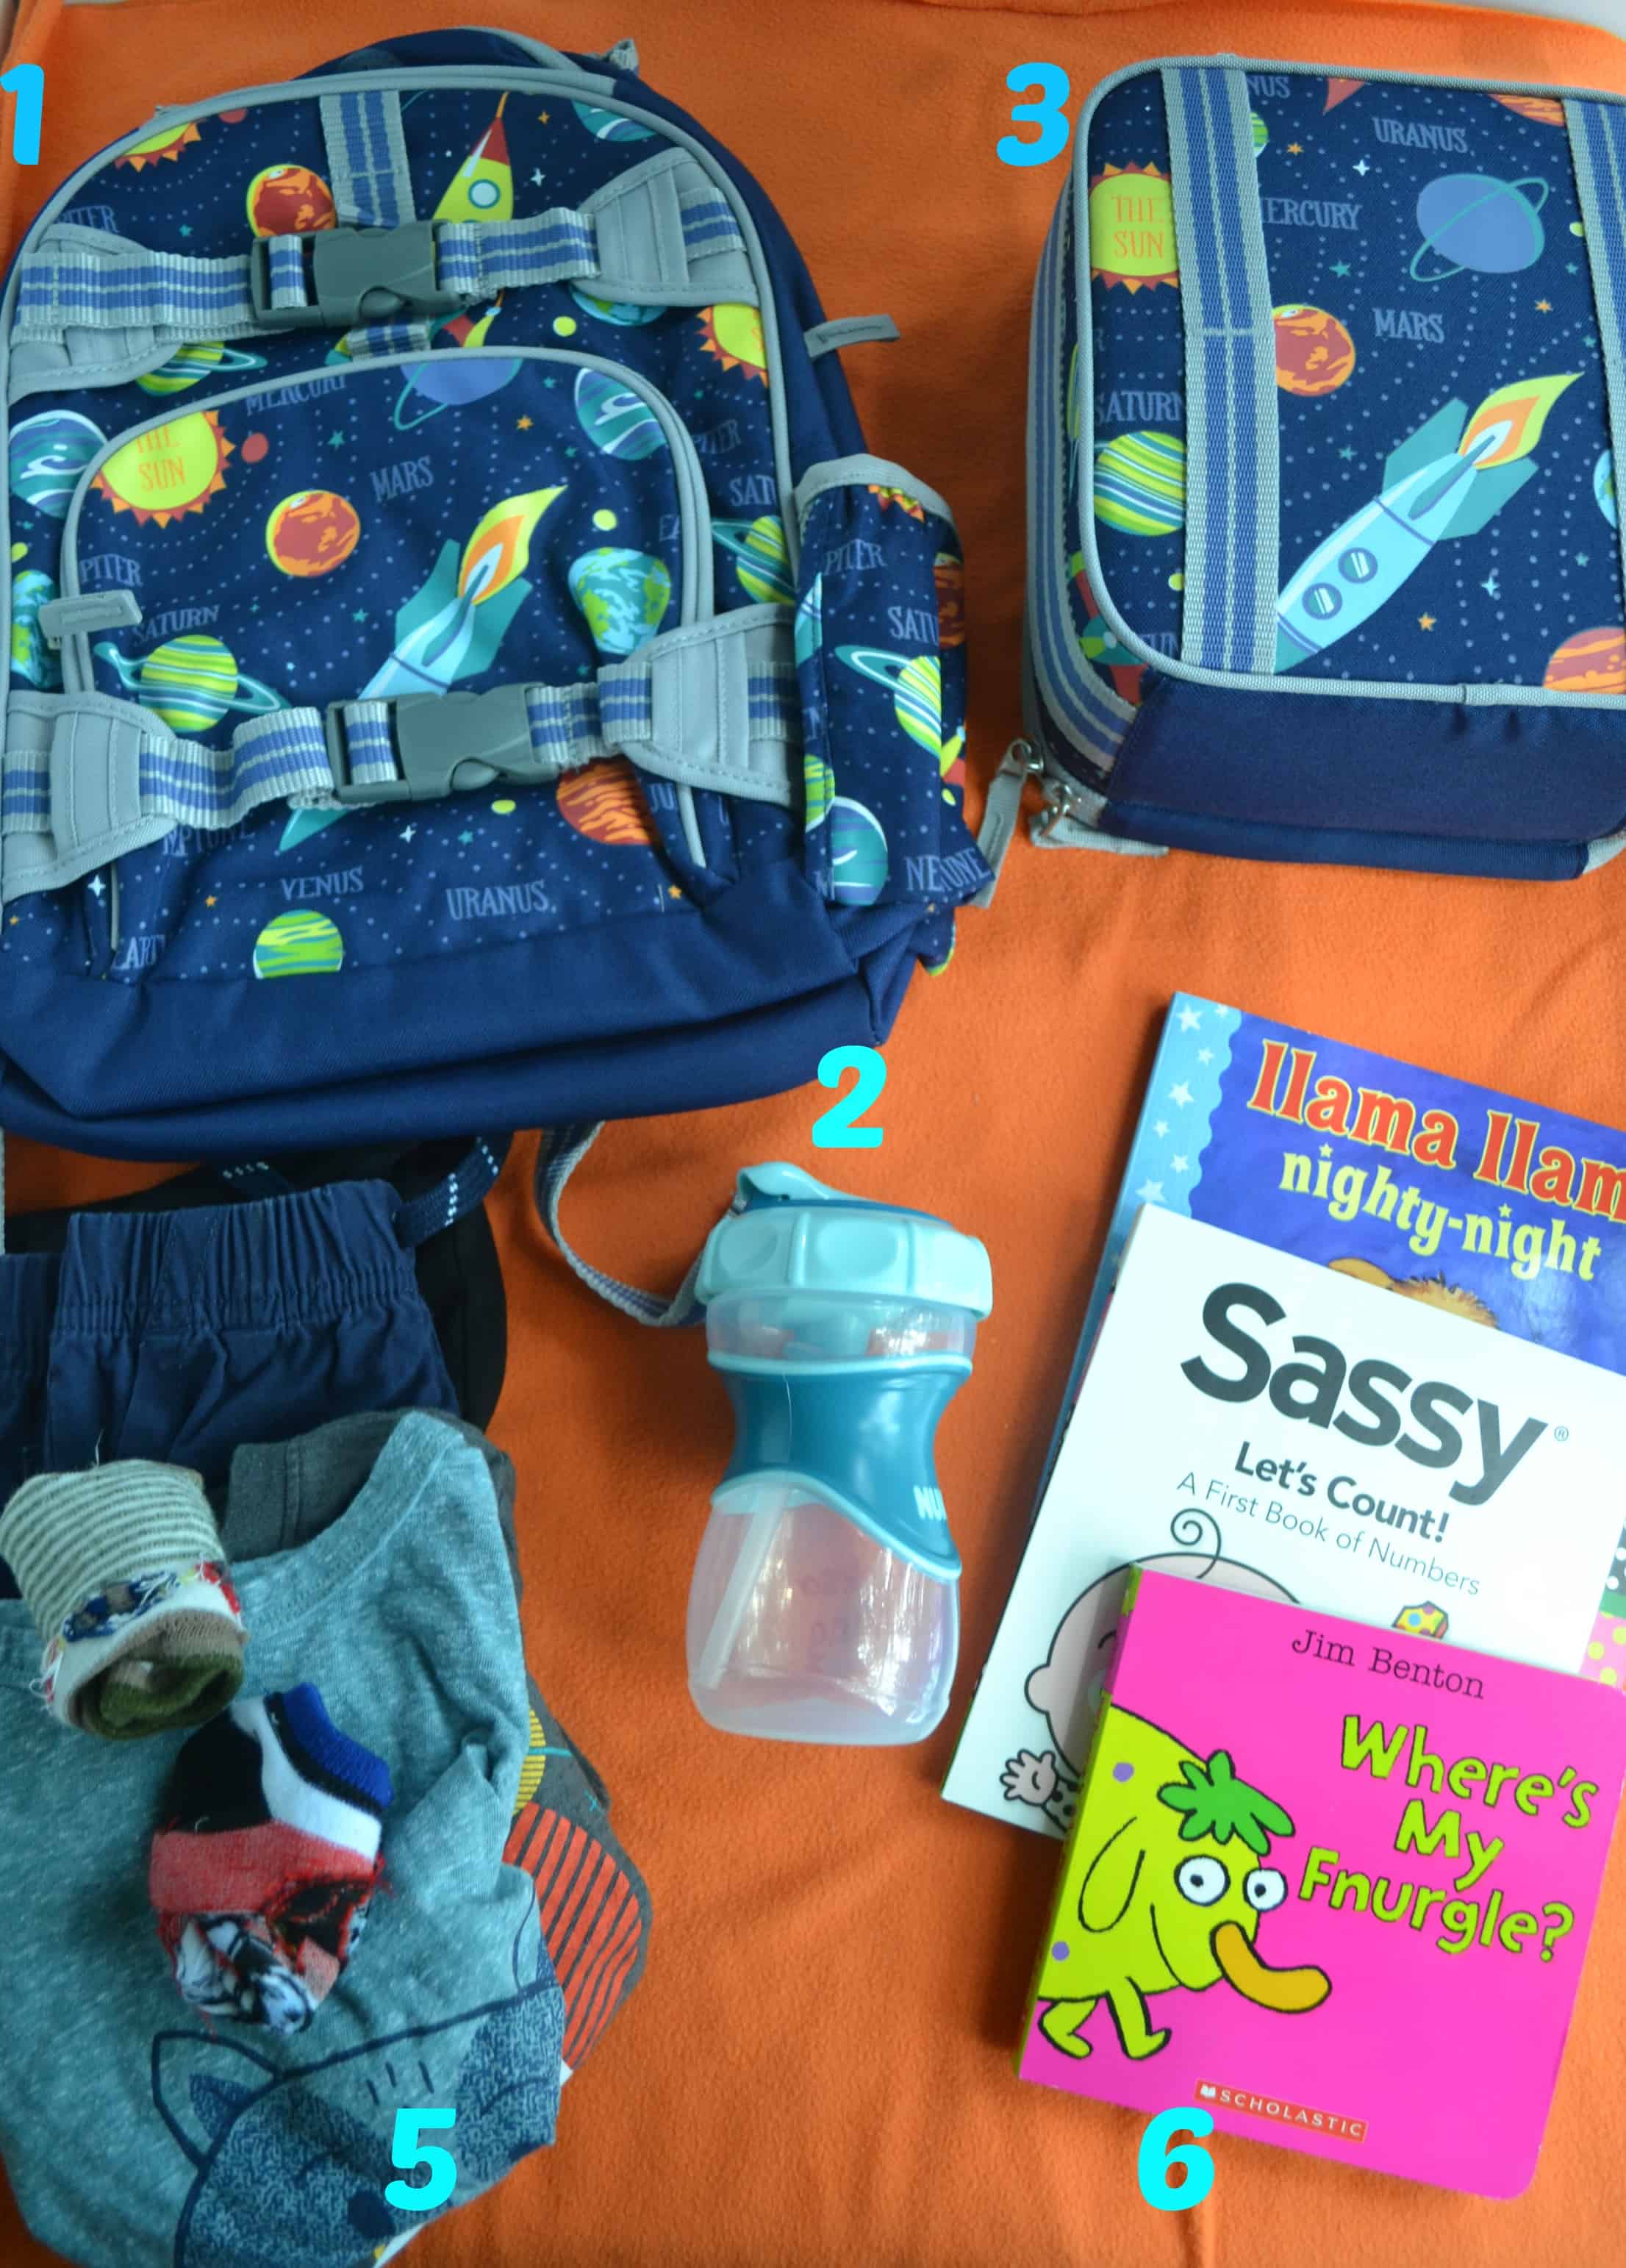 What to Pack in a Toddler's Daycare Bag